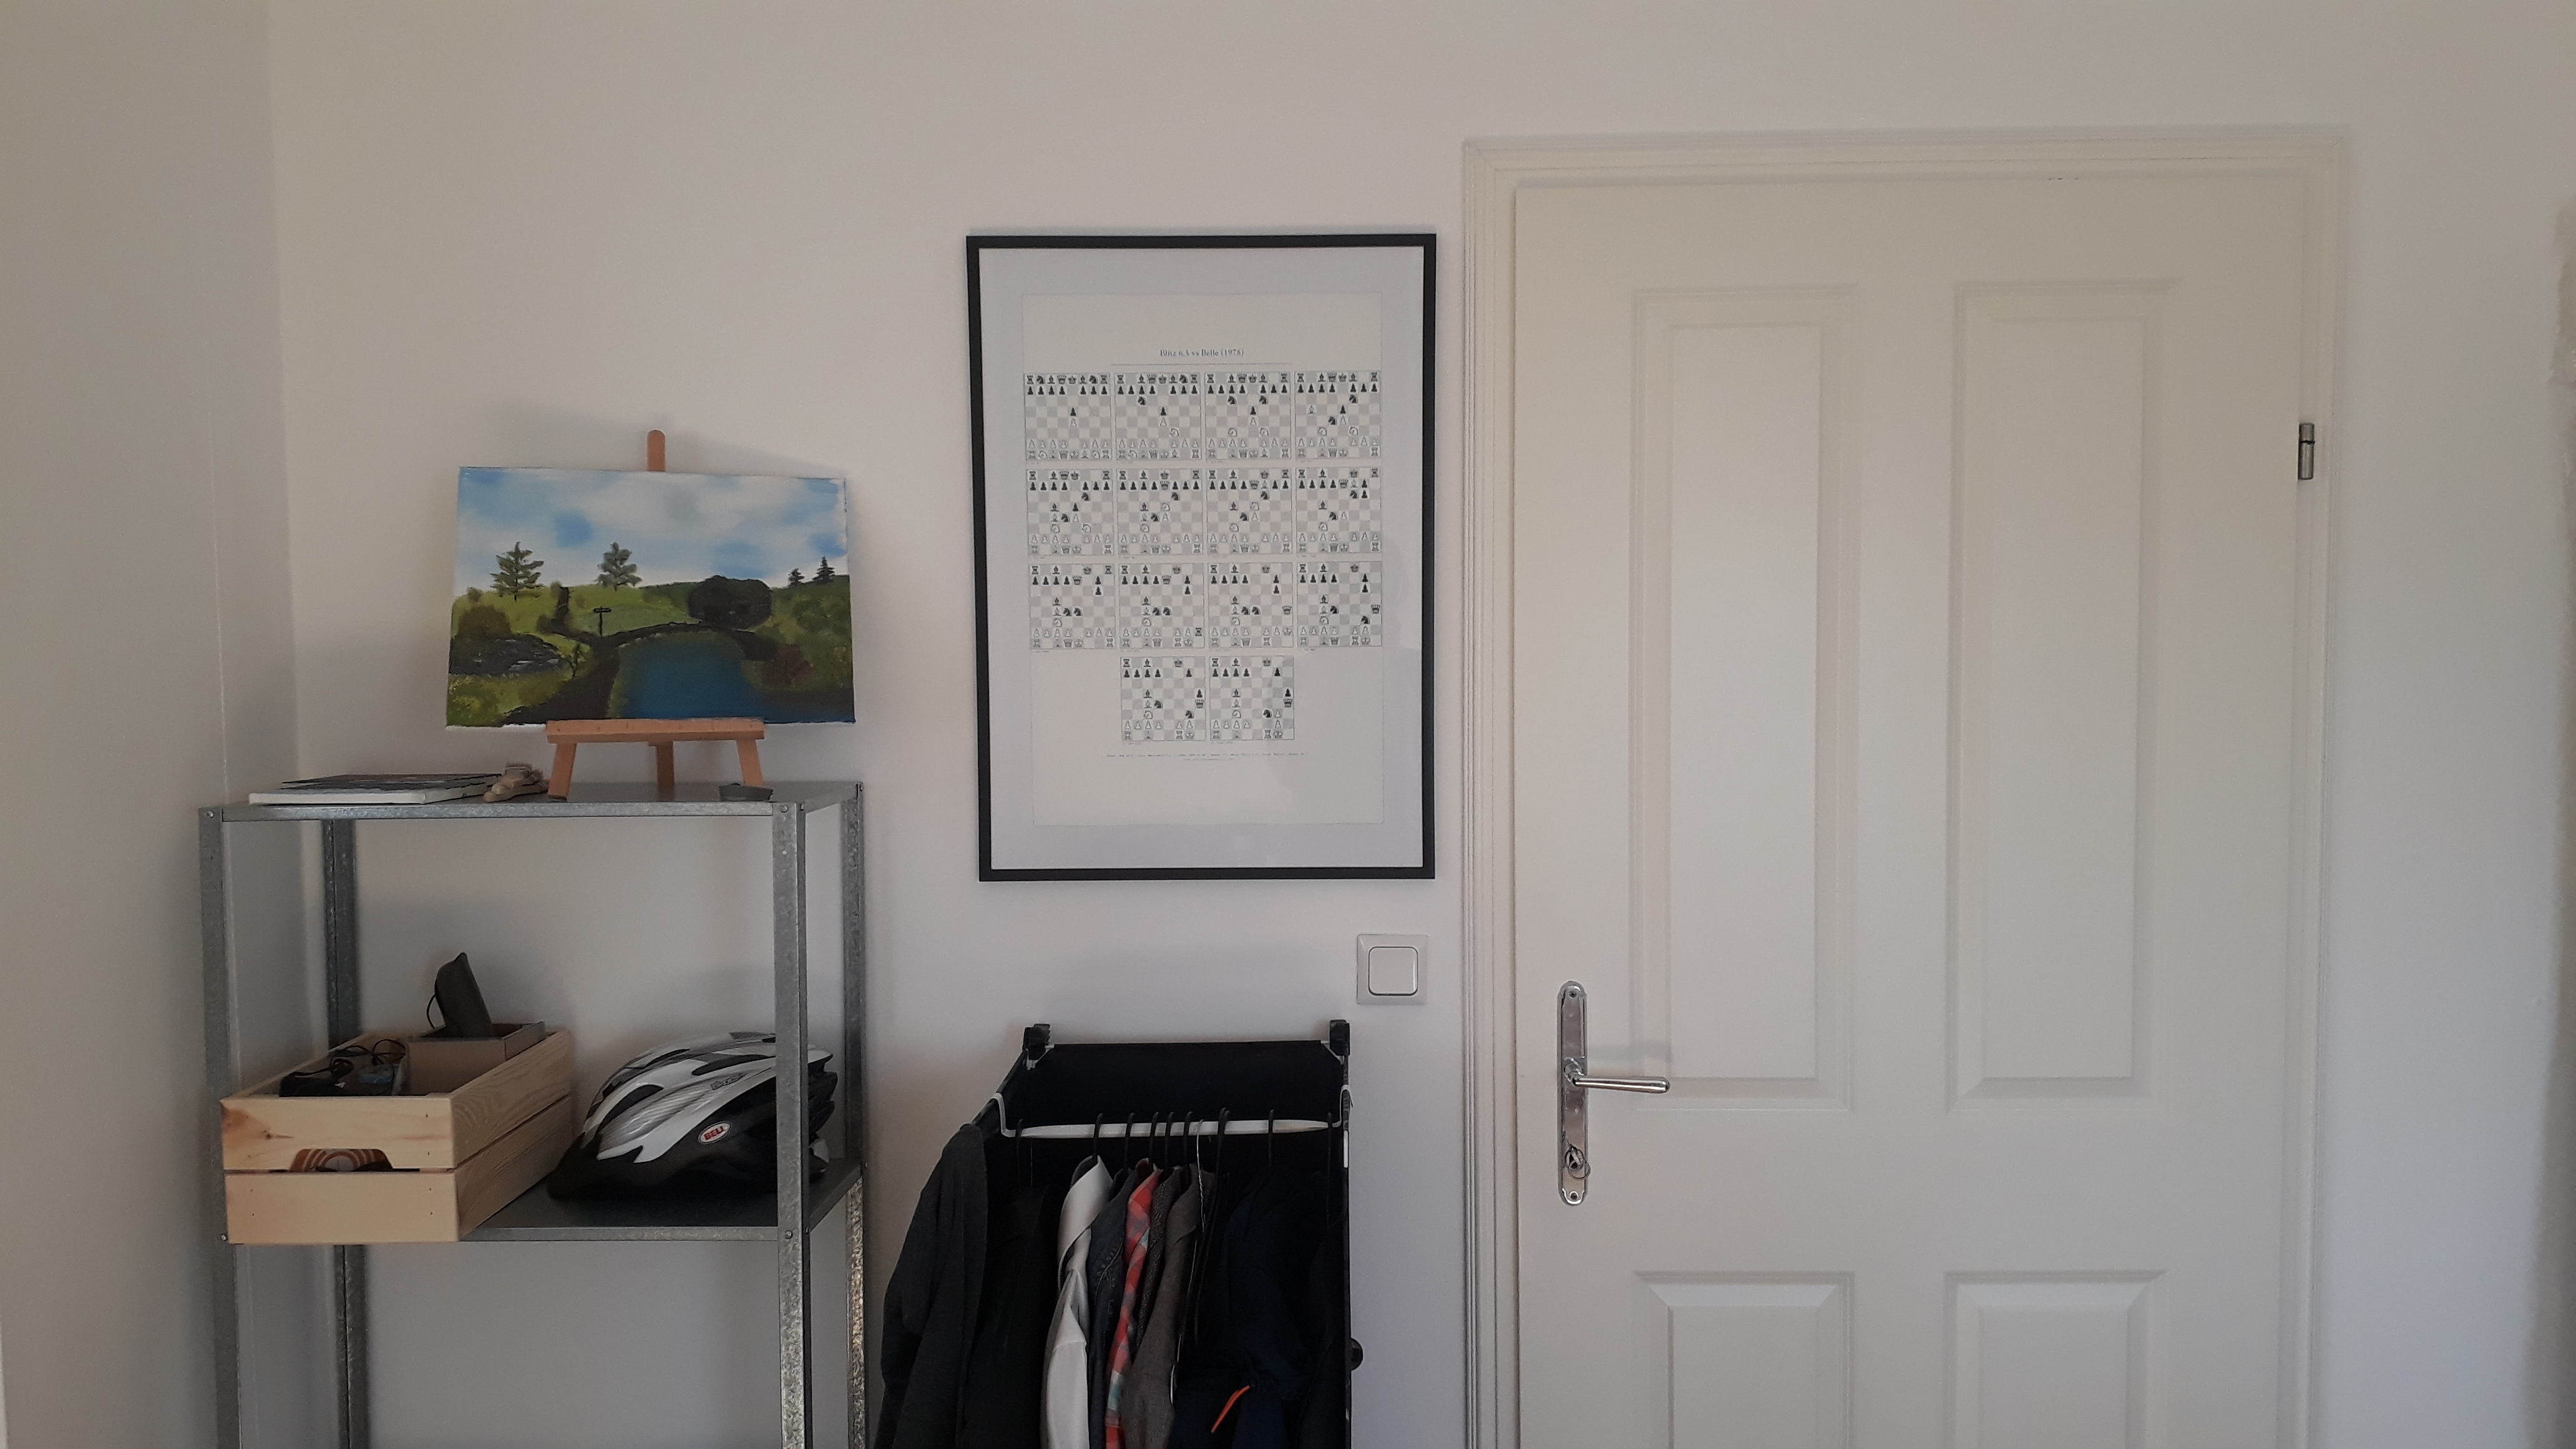 The framed poster seen from further away